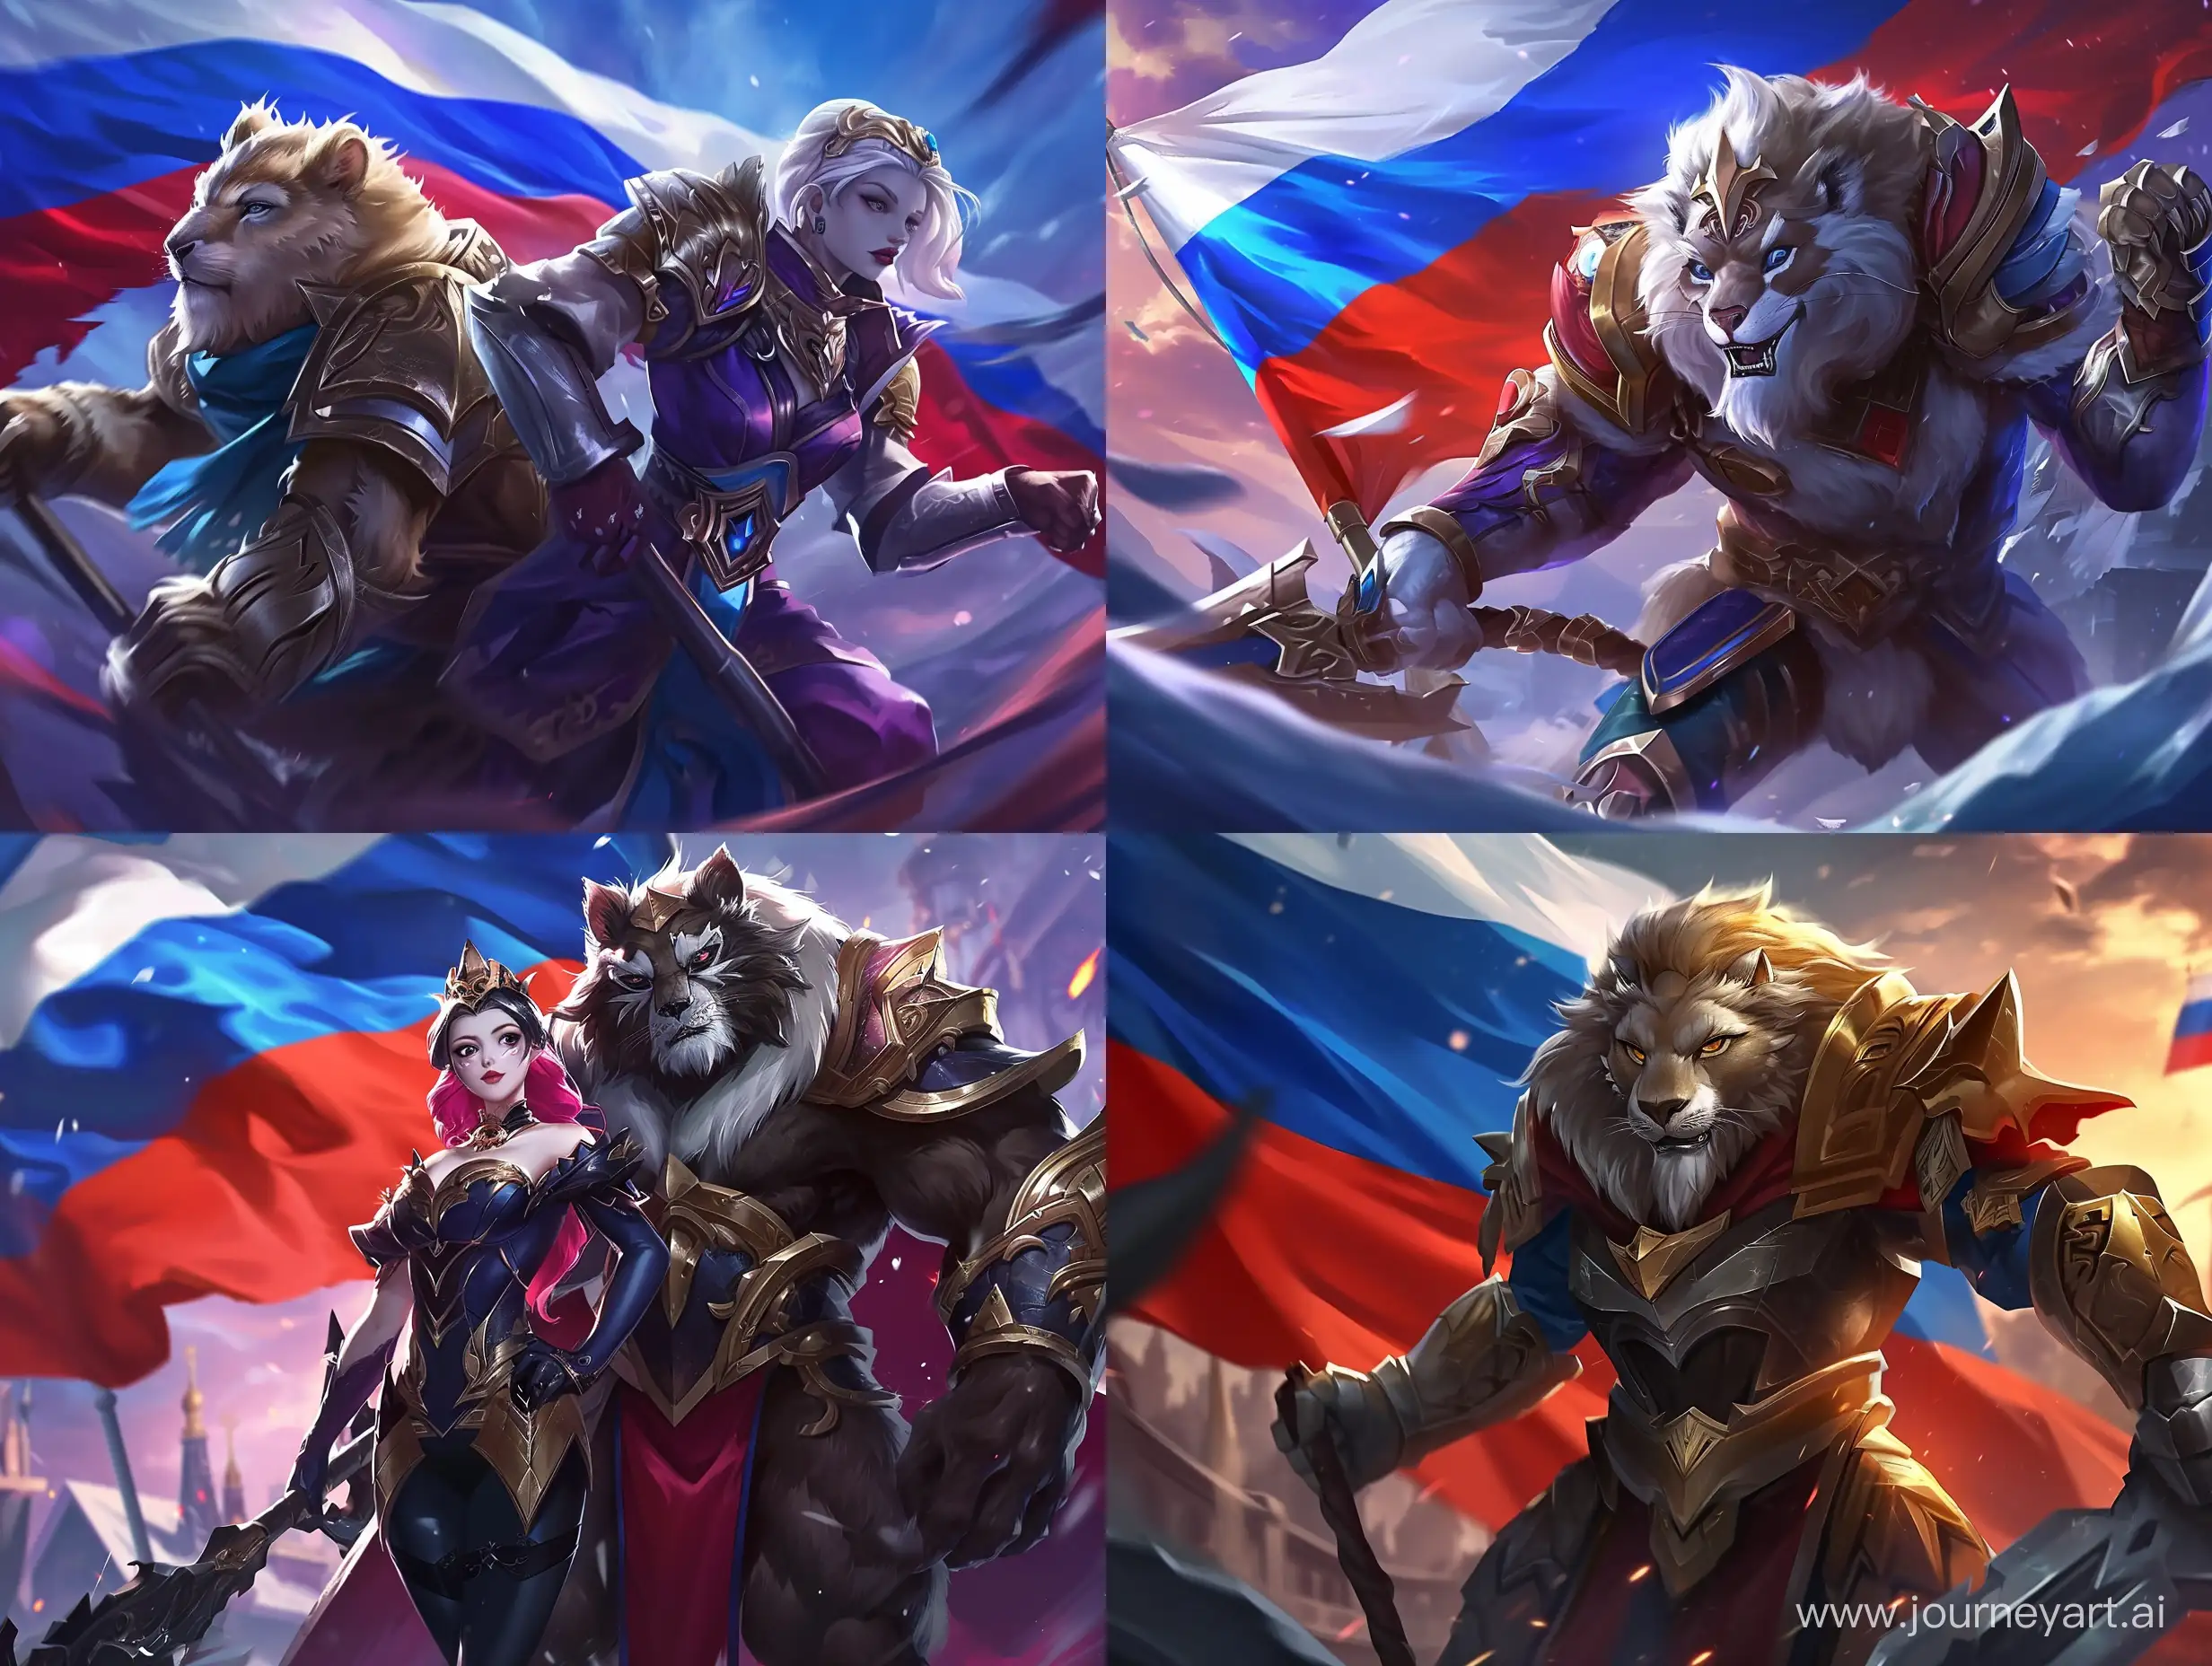 Cecilion x Carmilla, Mobile Legends: Bang Bang game, Russian flag in the background